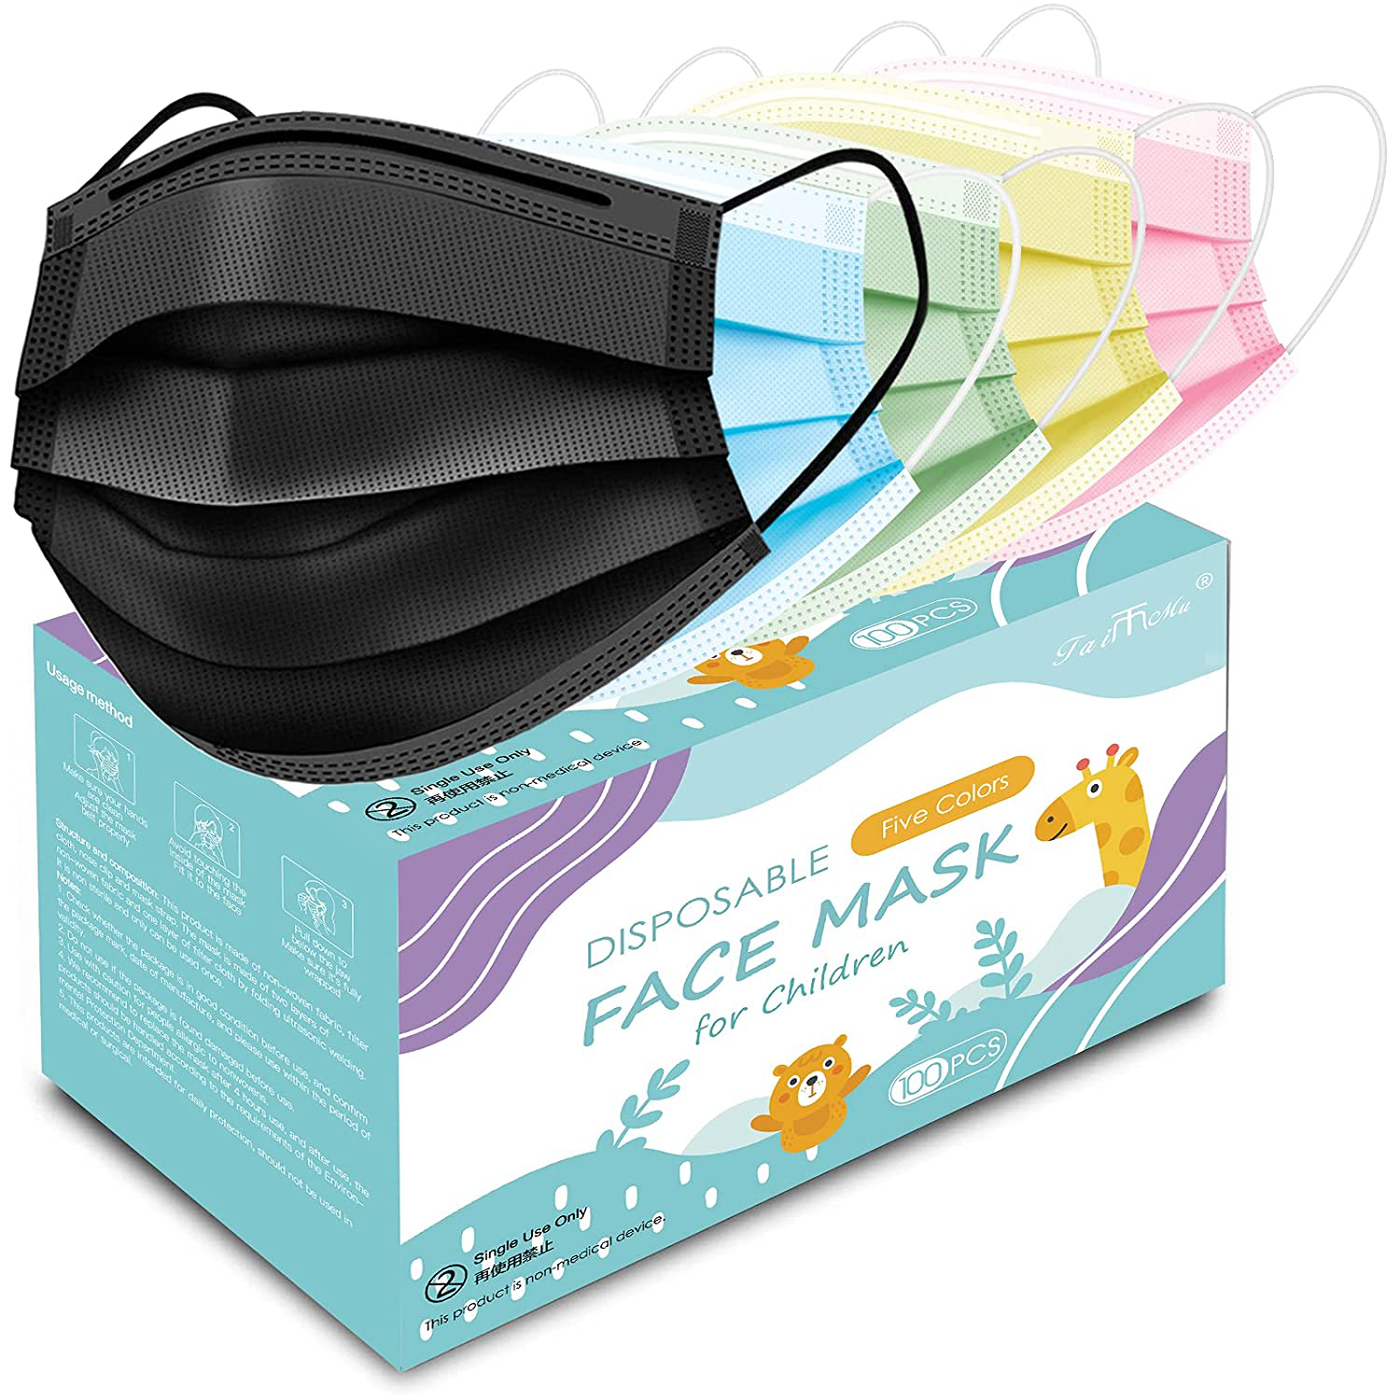 Multi Pack Kids Face Mask, Disposable Kids Masks for Protection Breathable